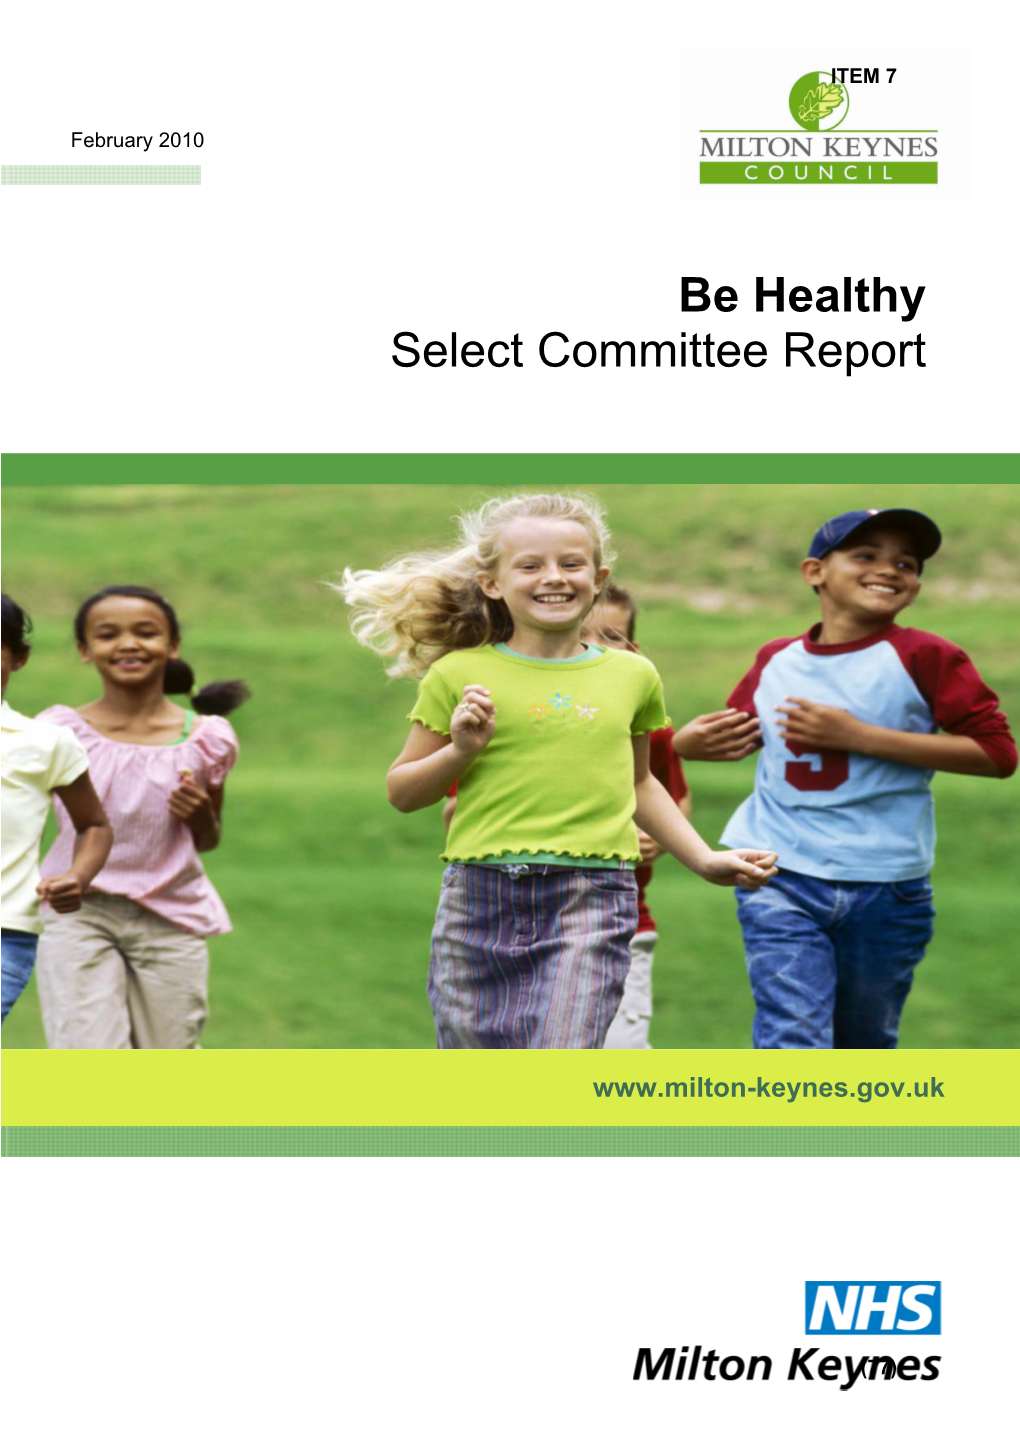 Be Healthy Select Committee Report